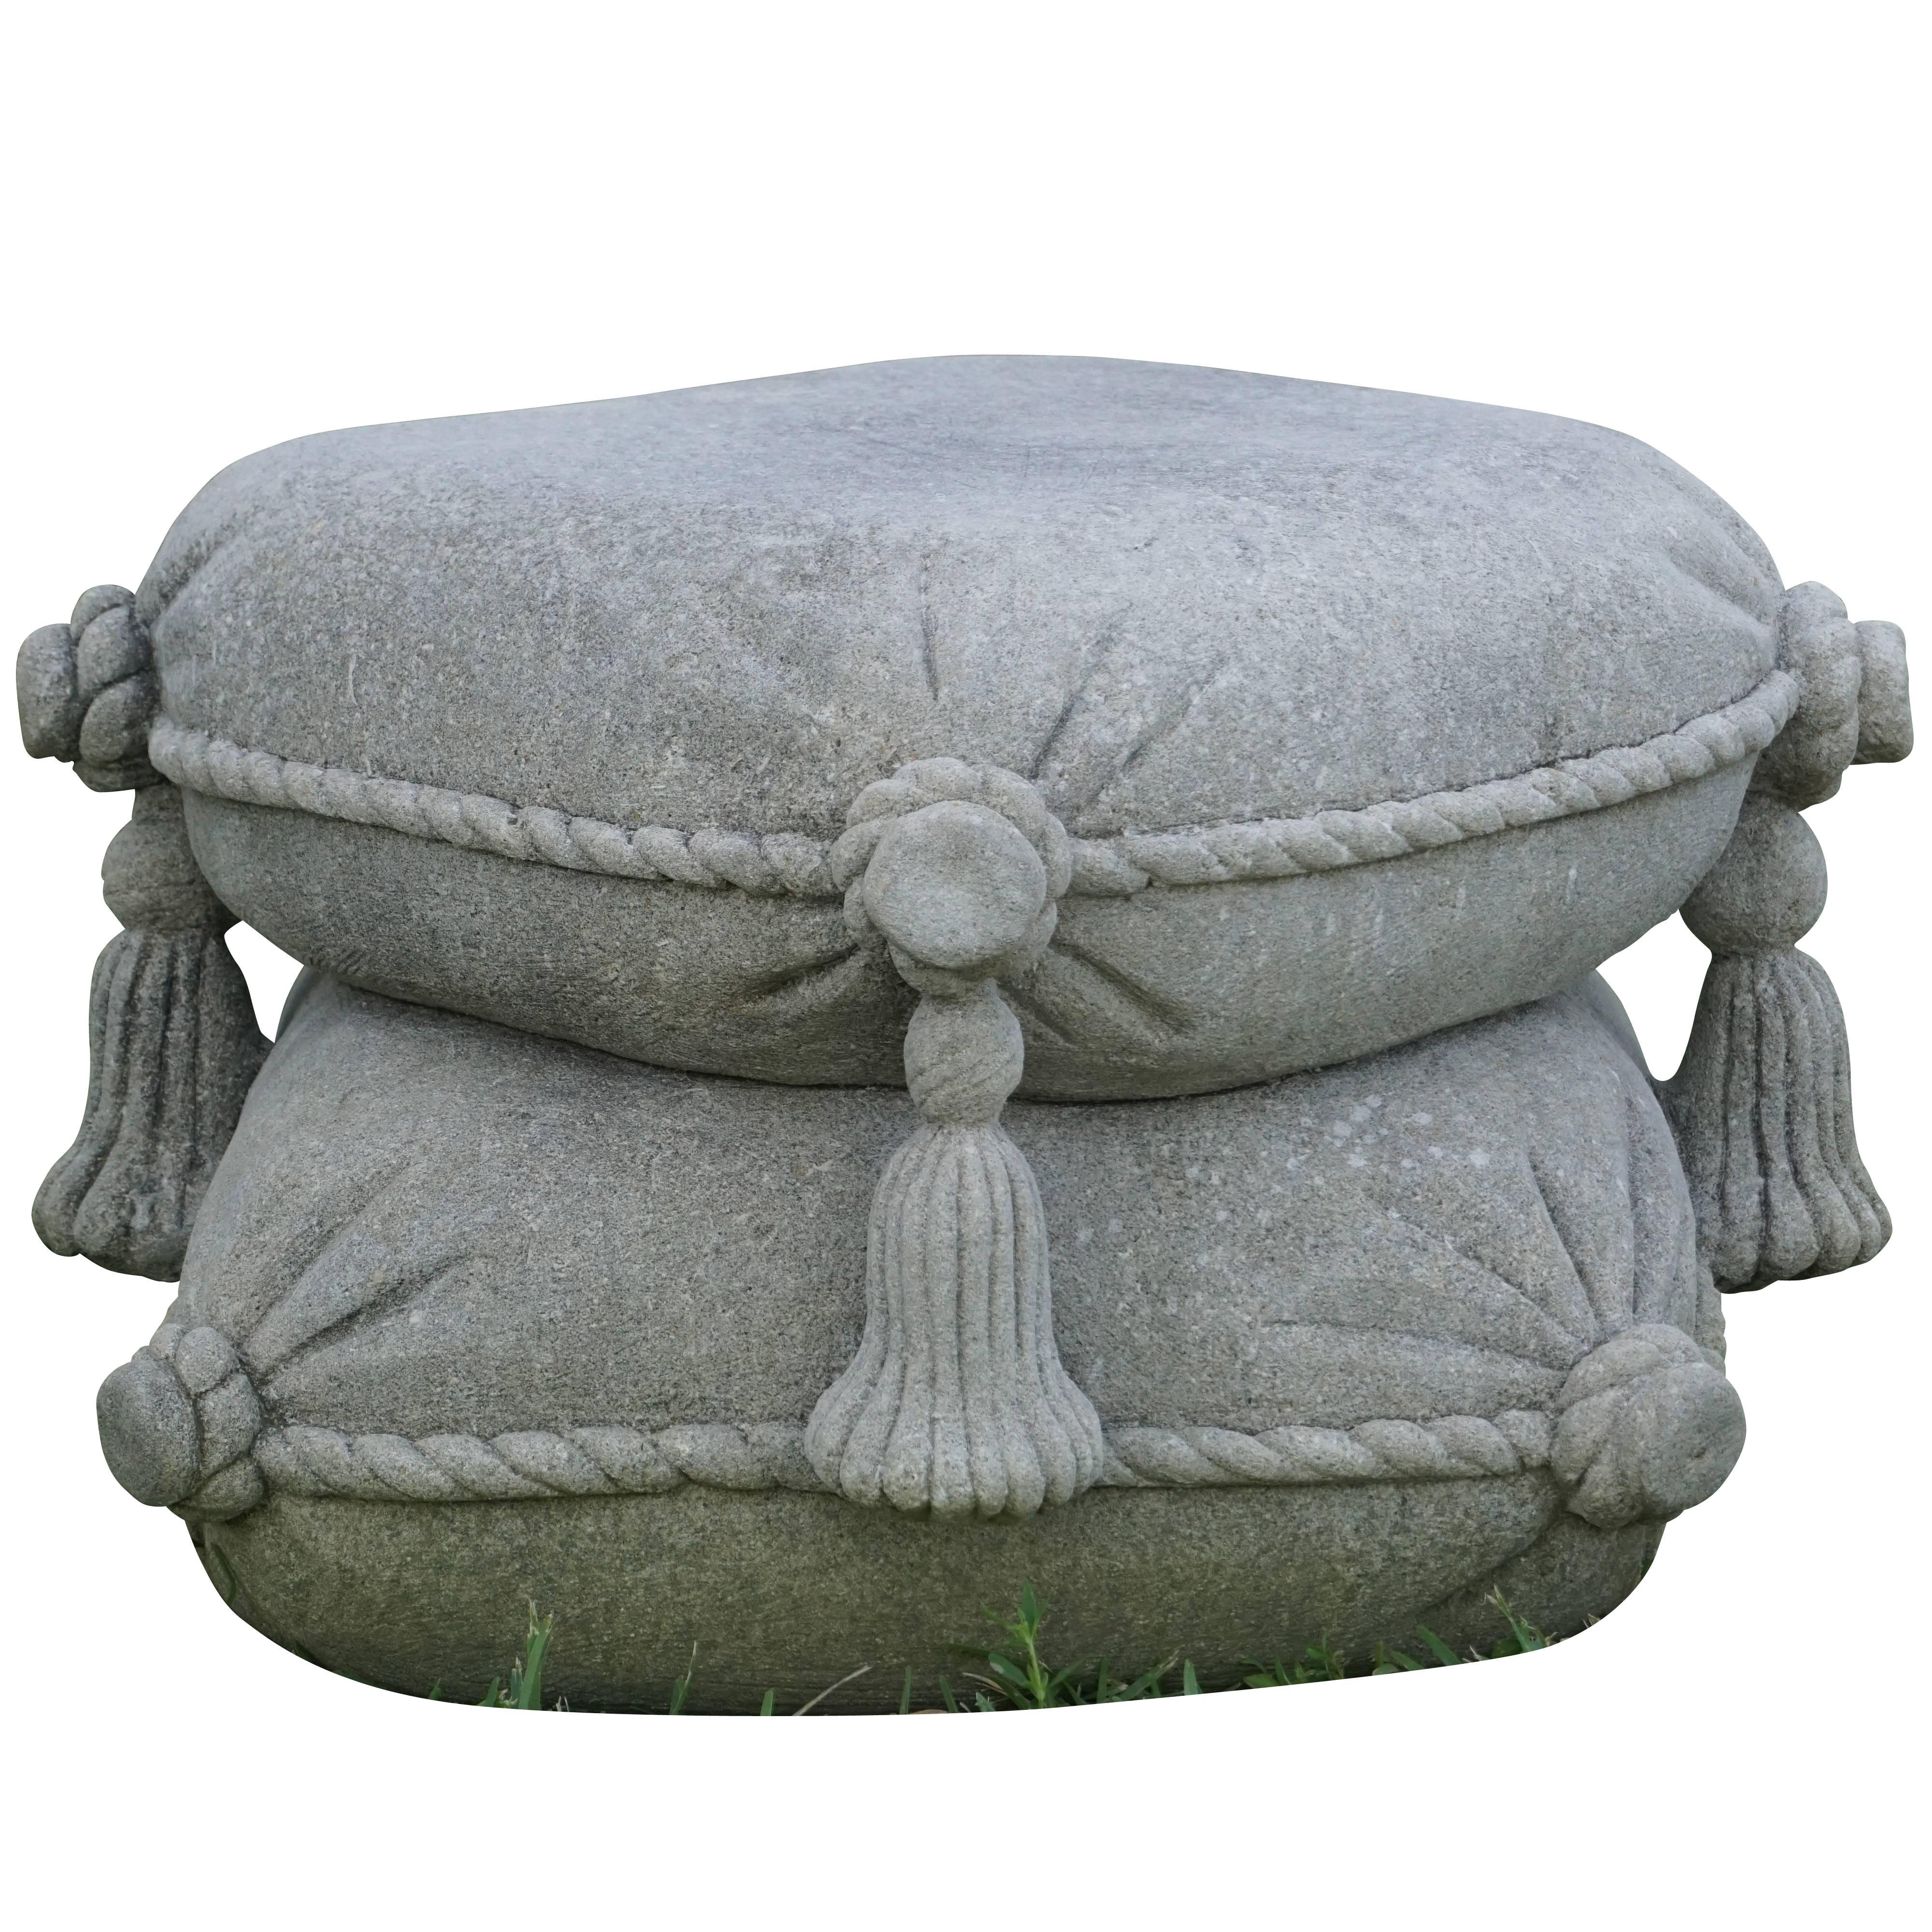 Hand-carved limestone garden seat in the shape of stacked cushions with detailed hand-sculpted rope decorations, tassels and buttons on the corners.